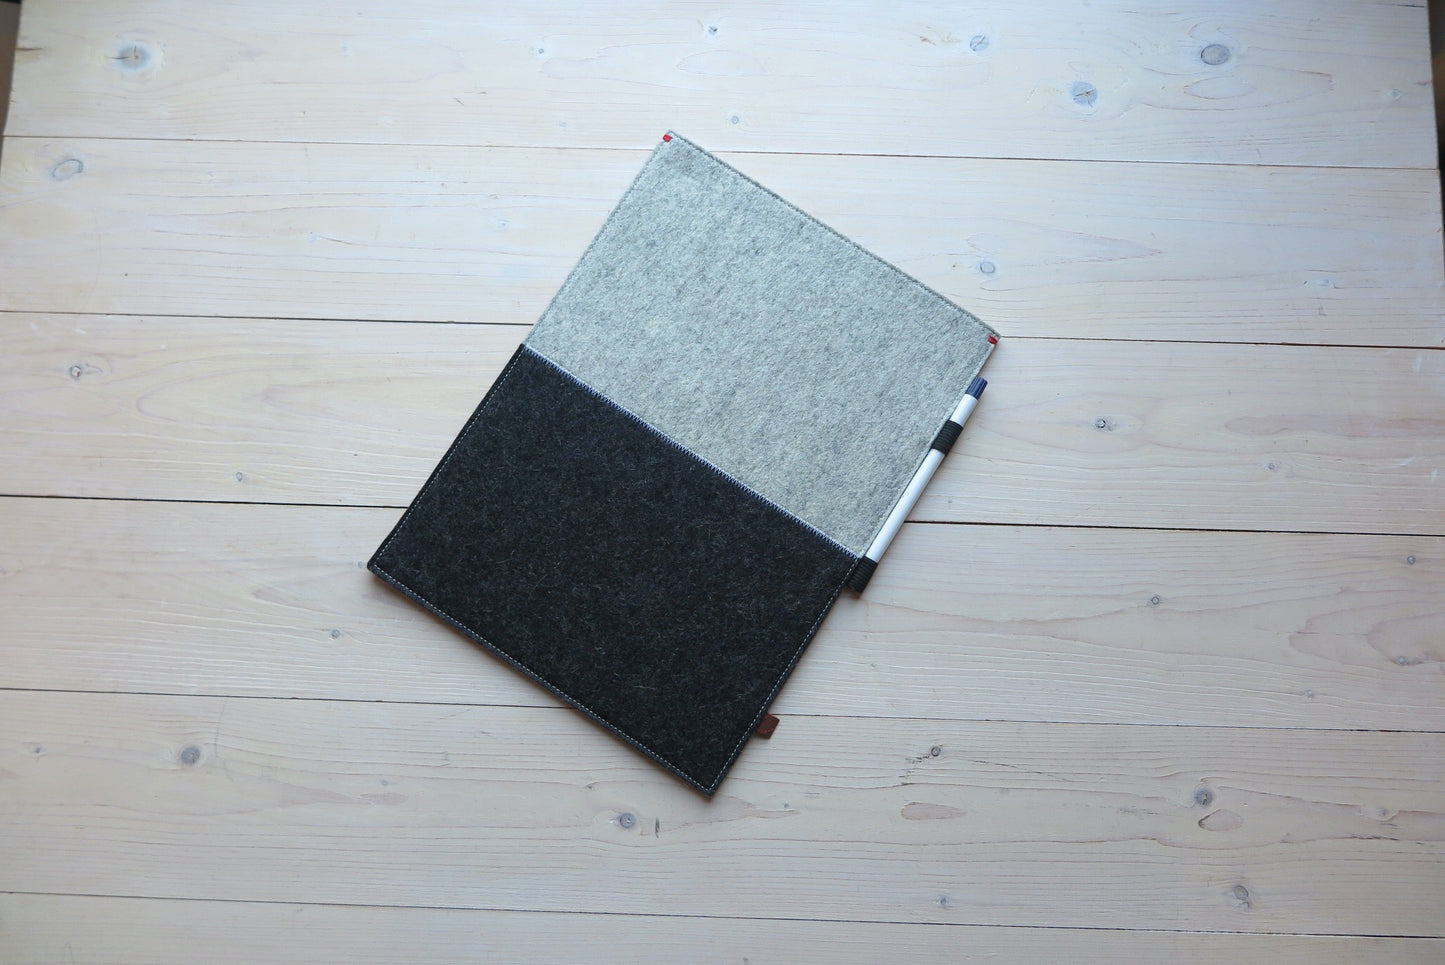 Felt cover iPad Pro 12.9 in gray and black with pen loops